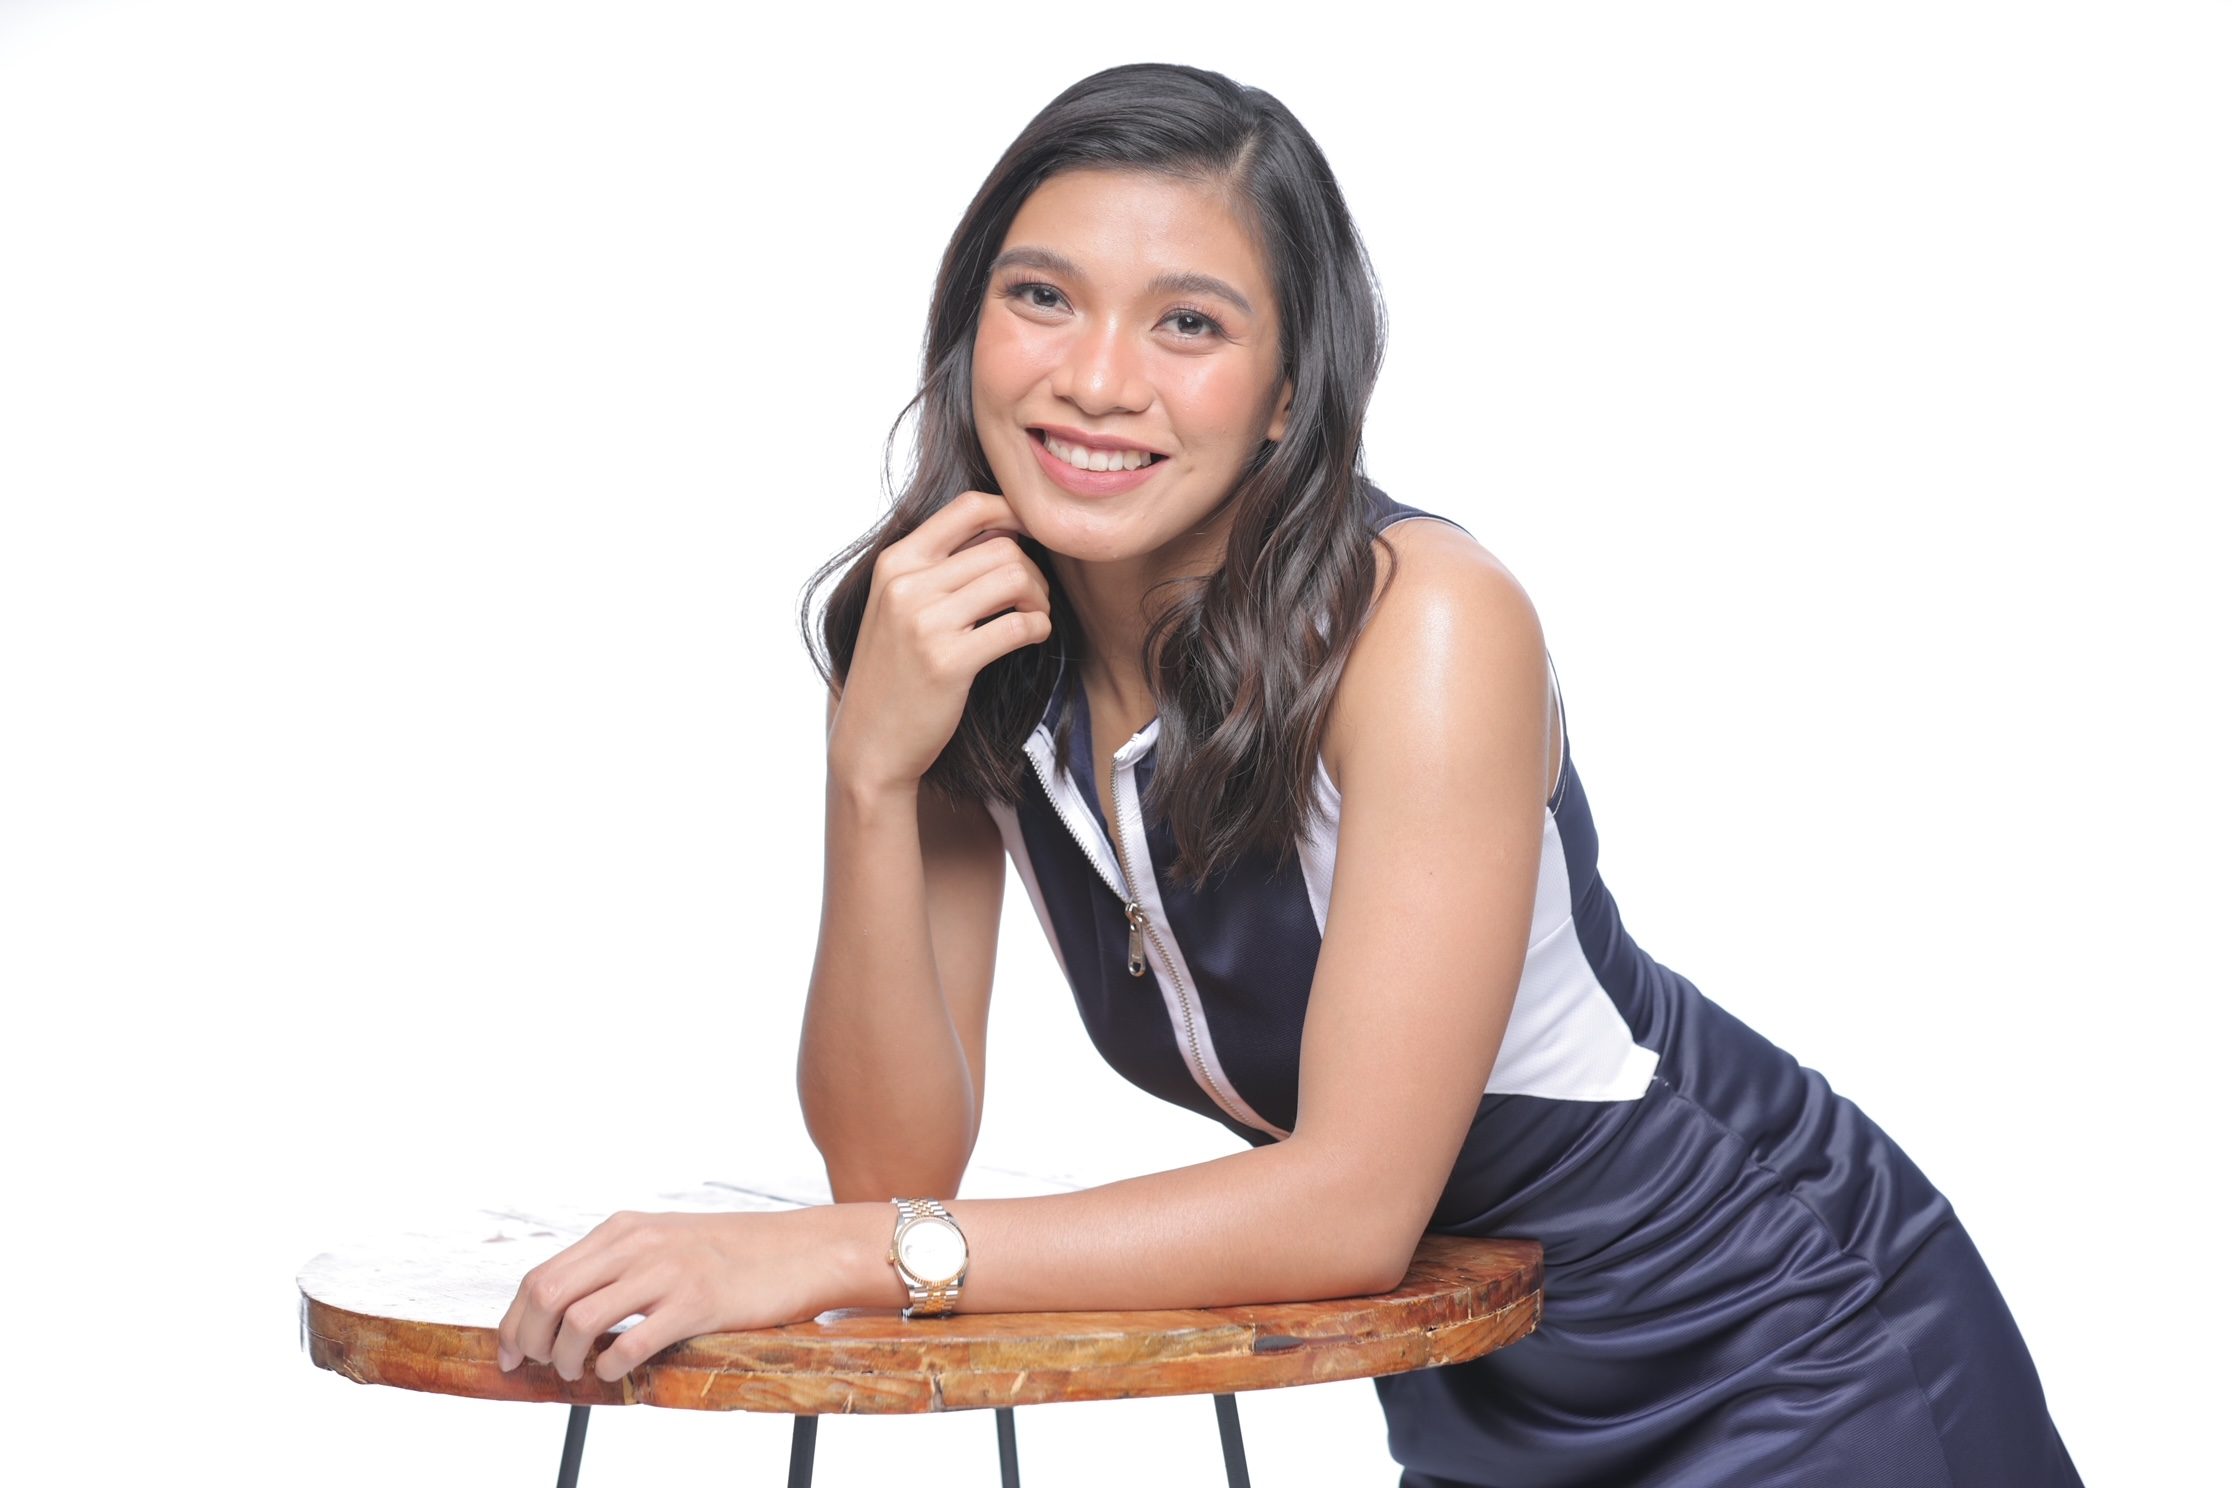 Candle making, living simply: How Alyssa Valdez financially future-proofs herself